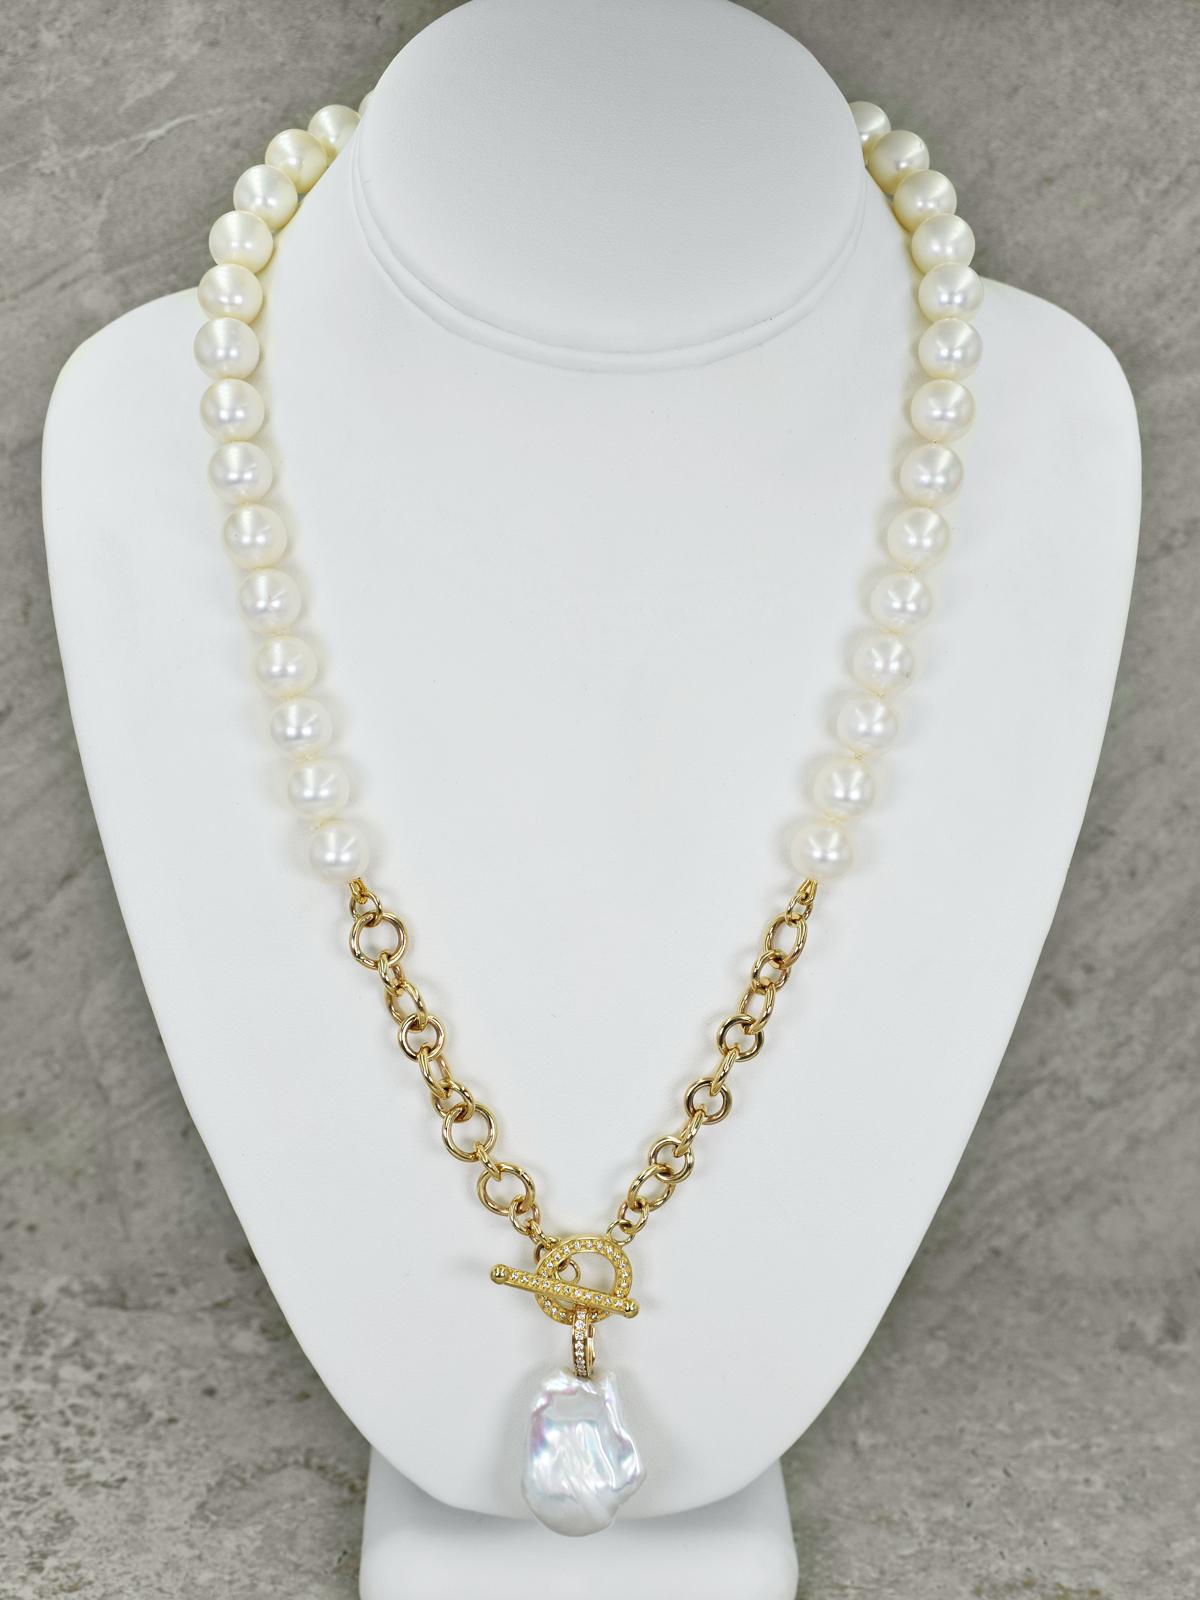 Gorgeous, large Freshwater Baroque Pearl and accent white diamond 14k yellow gold enhancer pendant on a knotted, 11mm round white freshwater pearl beaded necklace. Necklace features a 14k gold chain and a double sided, diamond set toggle closure.